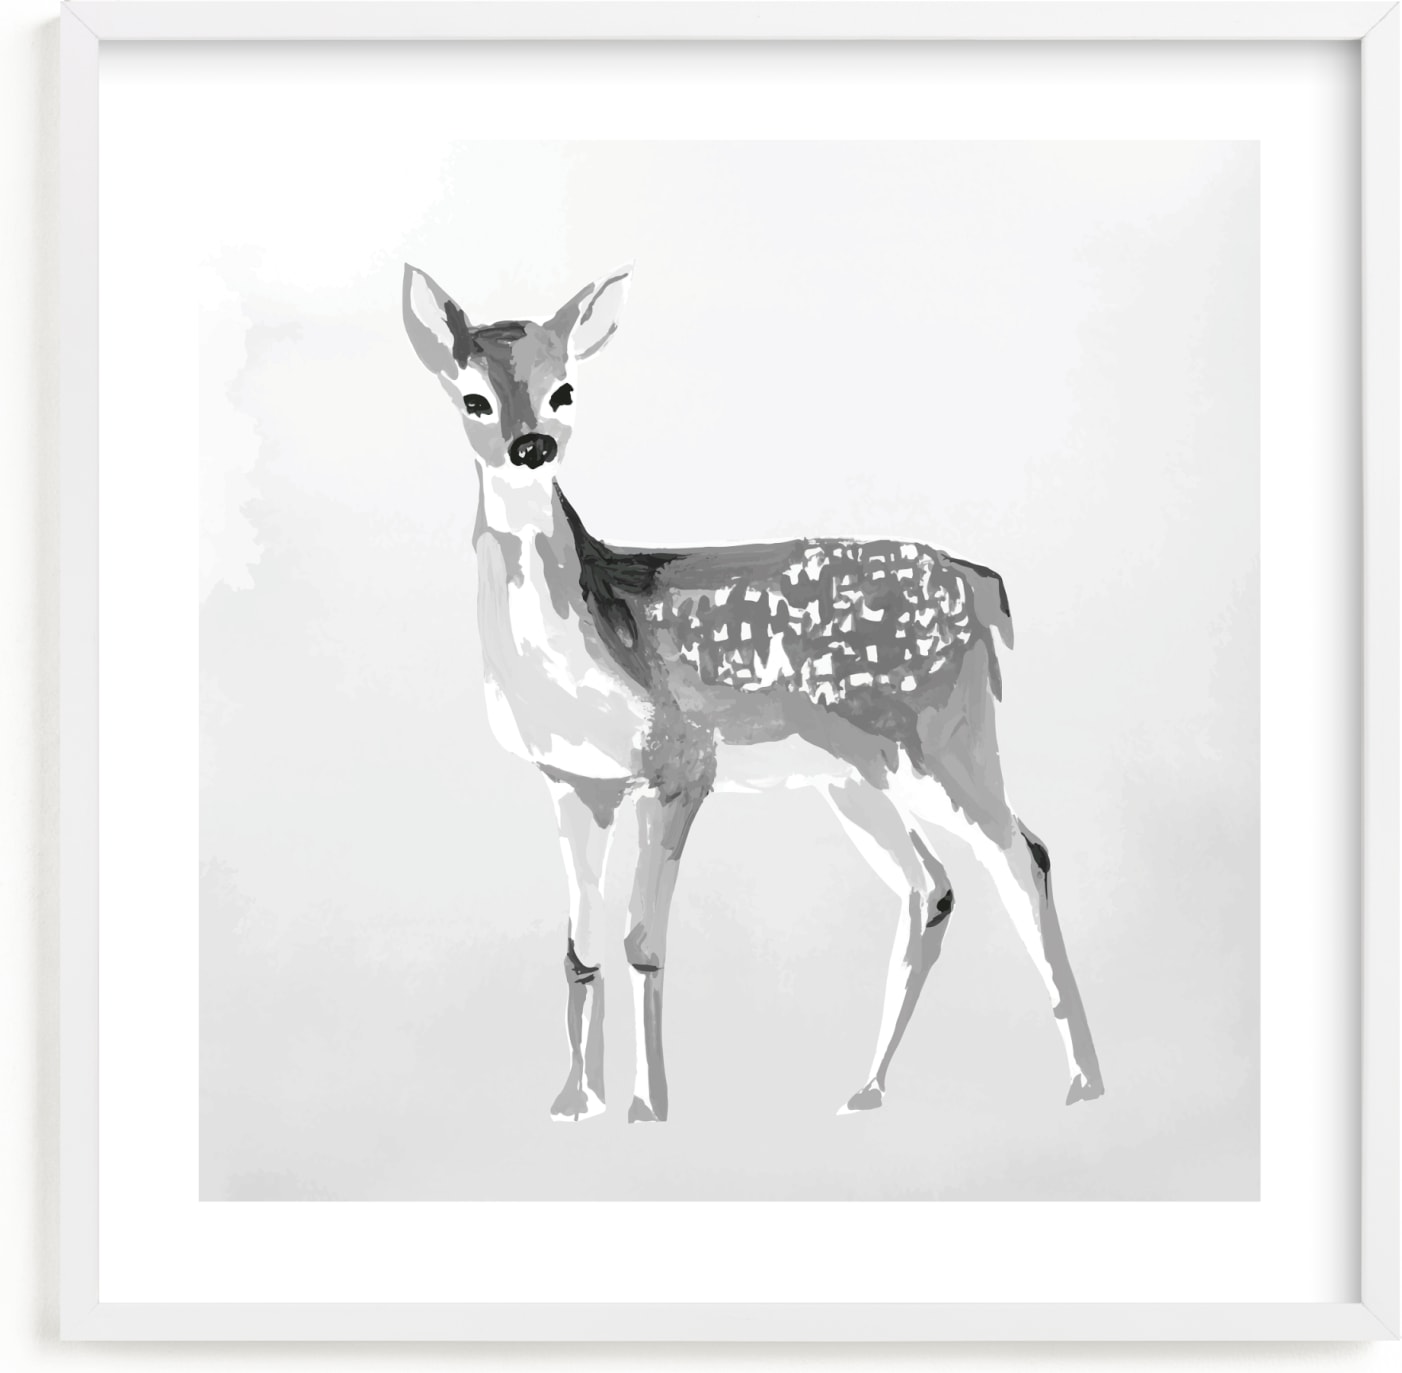 This is a black and white nursery wall art by Teju Reval called Enchanted Deer II.